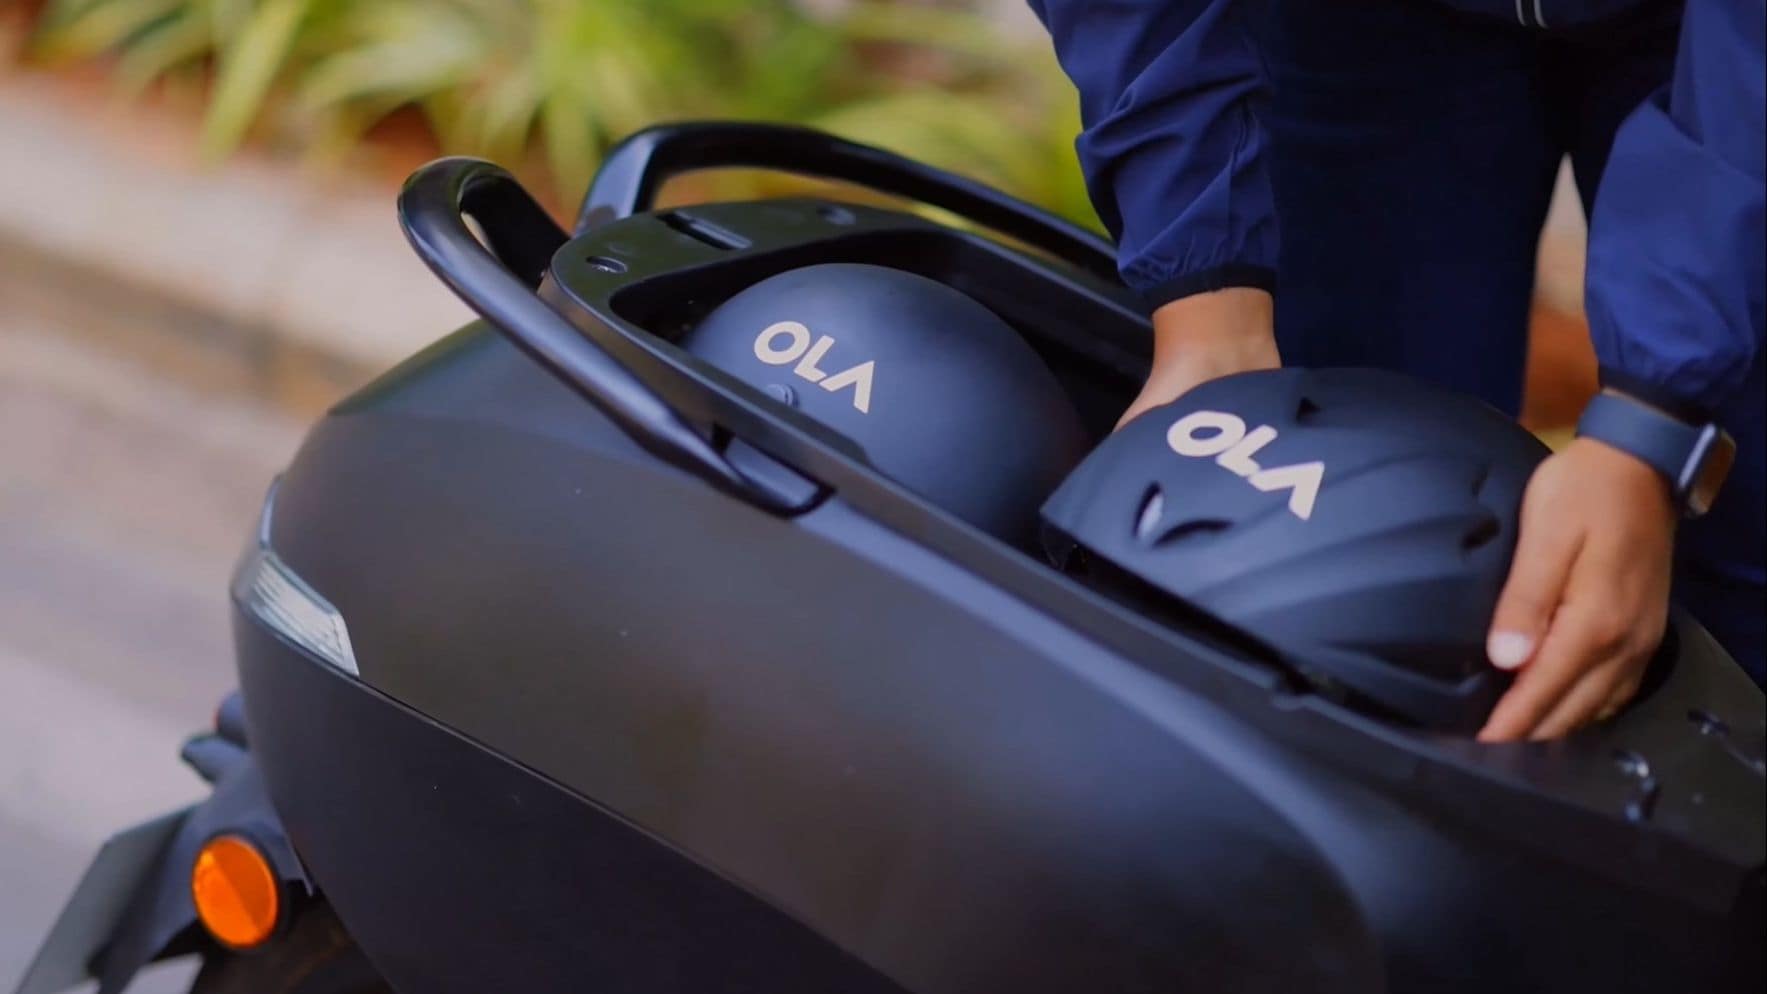 The Ola electric scooter can store two half-face helmets in its under-seat storage bay. Image: Ola Electric